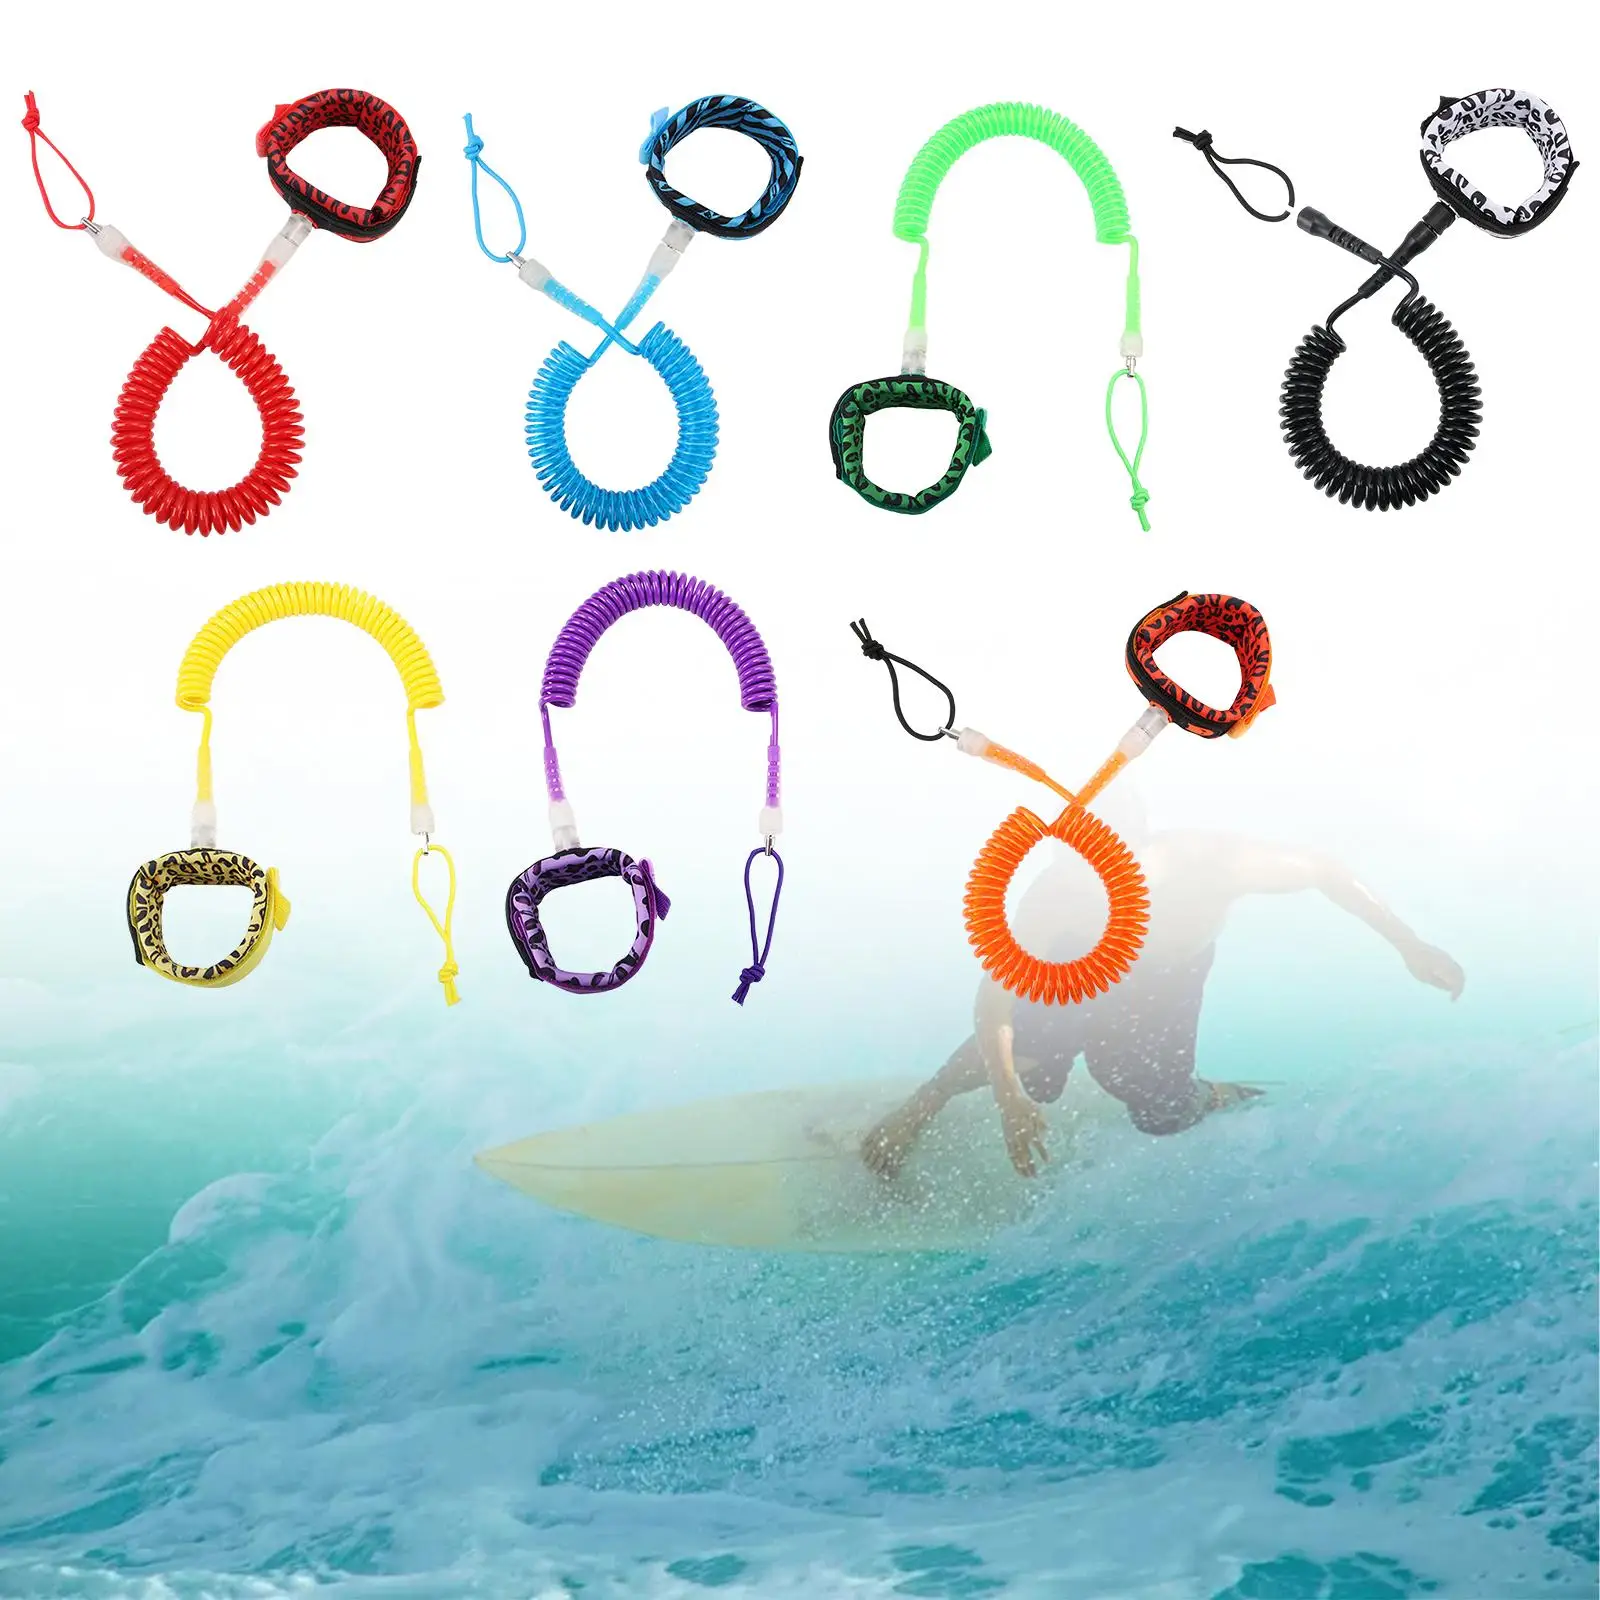 Surfboard Leash 10ft Stand up Paddle Board Stretchy Lead Durable Paddle Board Strap for All Water Sport Surfboard SUP Surfboard